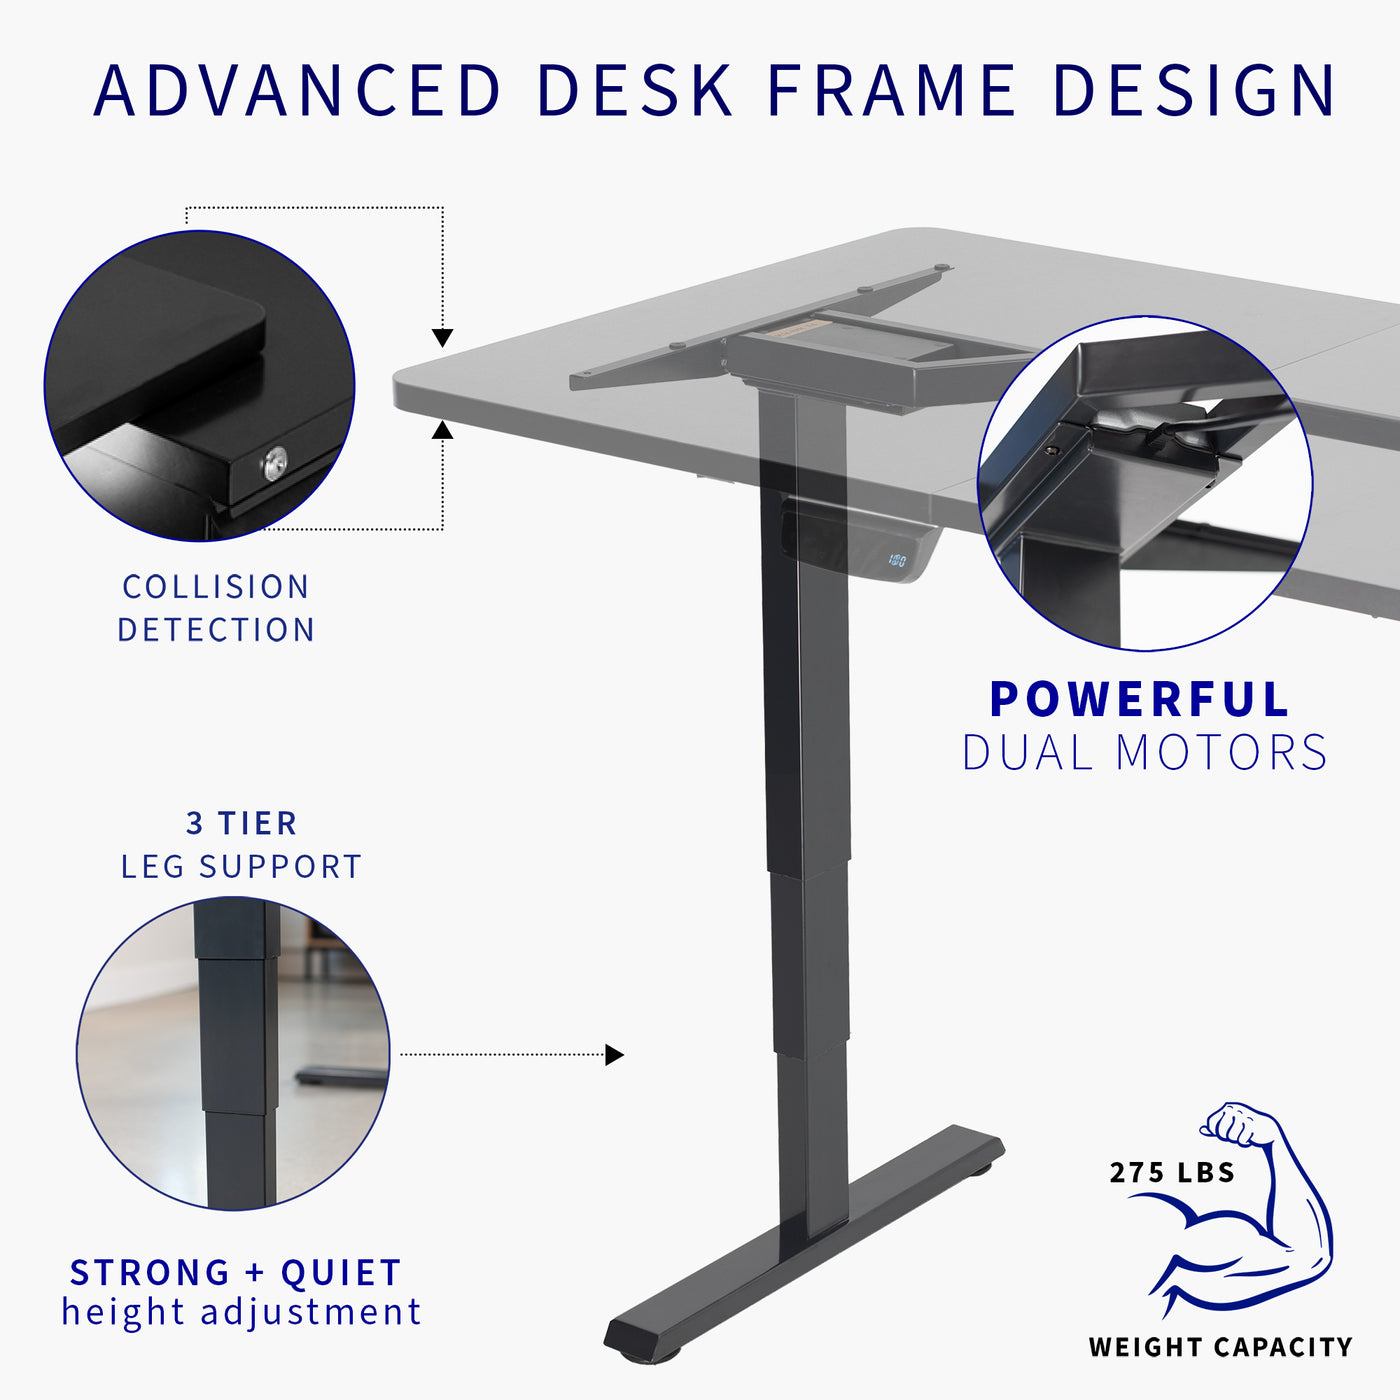 Large sturdy sit or stand active workstation with adjustable height using touch screen control panel.